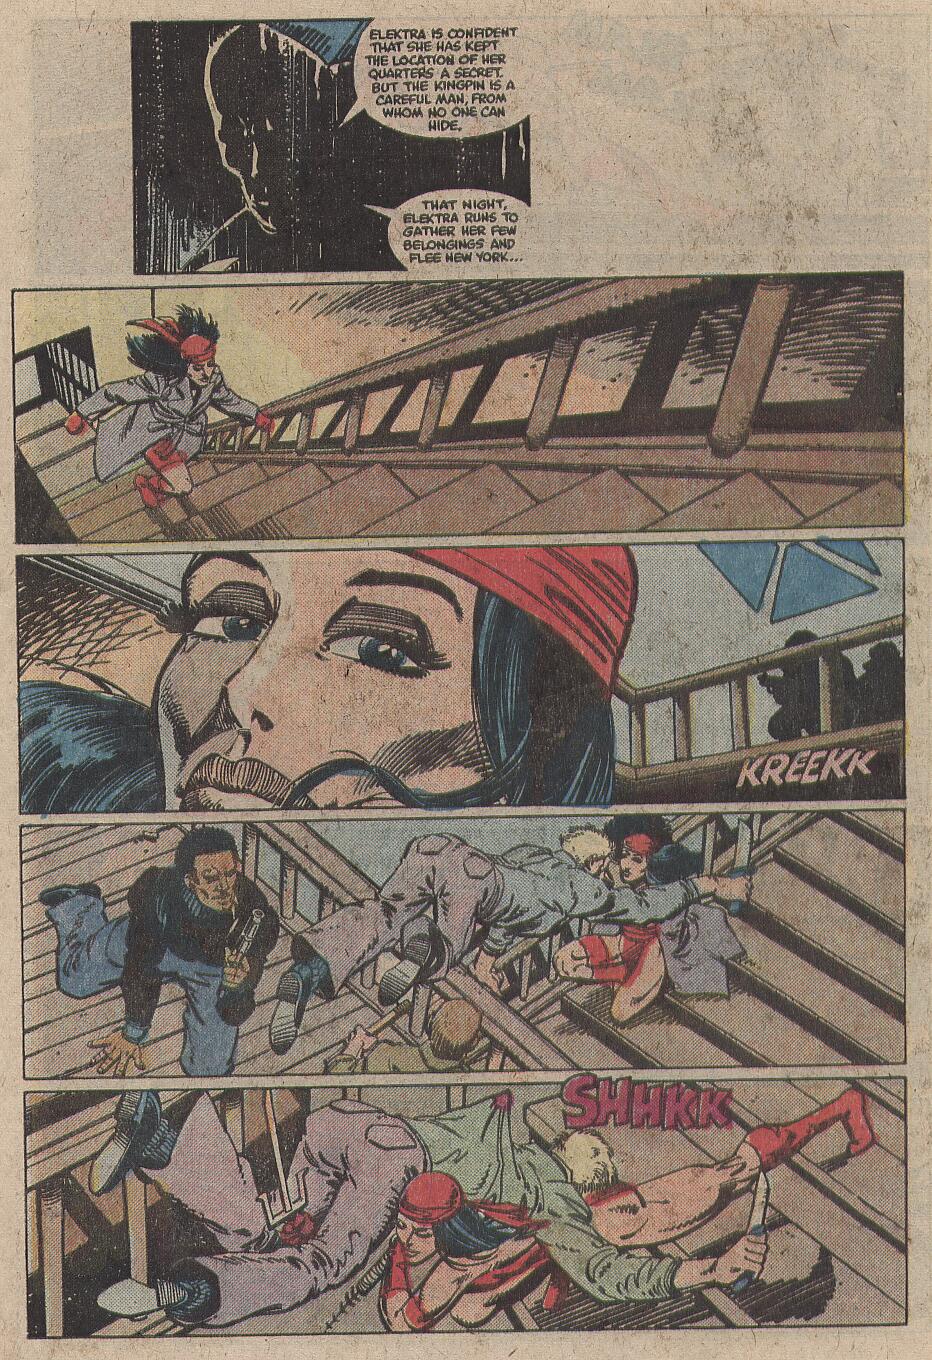 What If? (1977) issue 35 - Elektra had lived - Page 9